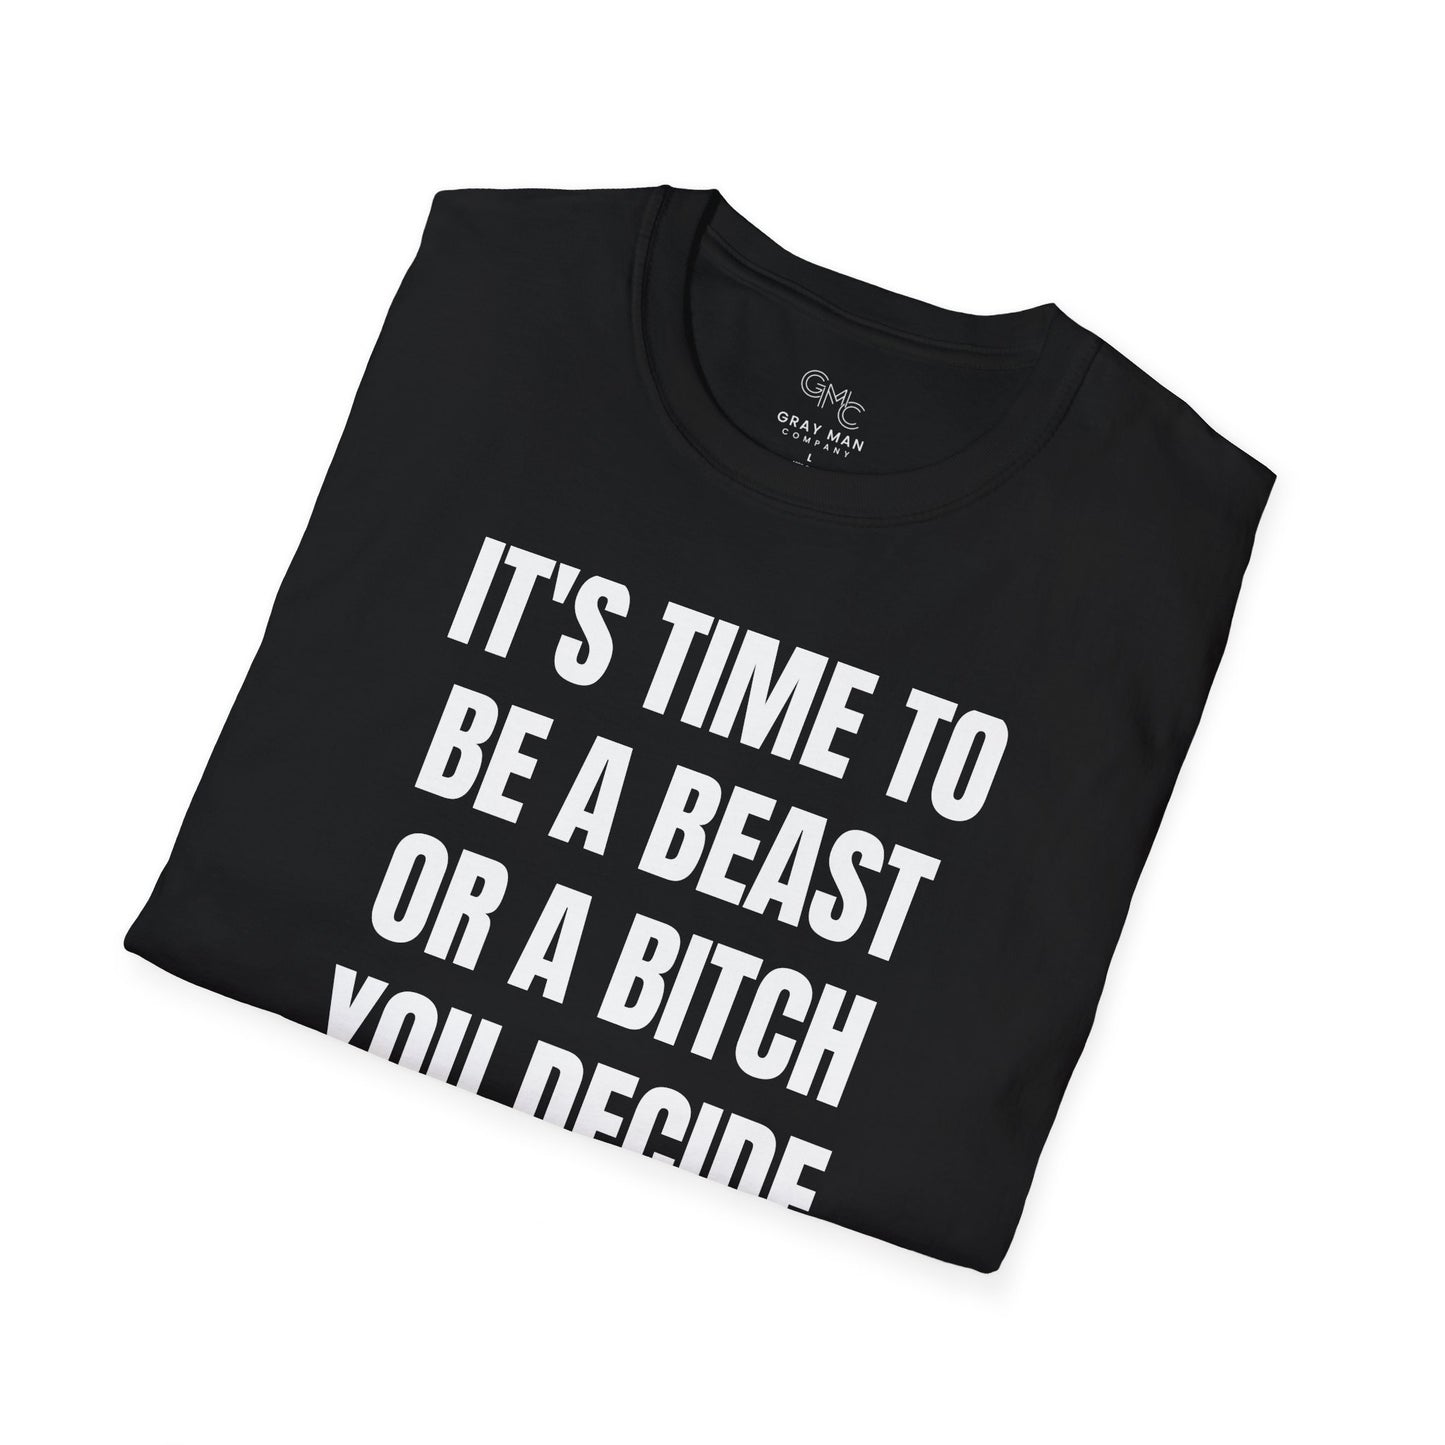 EDC Graphic T-Shirt - BEAST OR BITCH